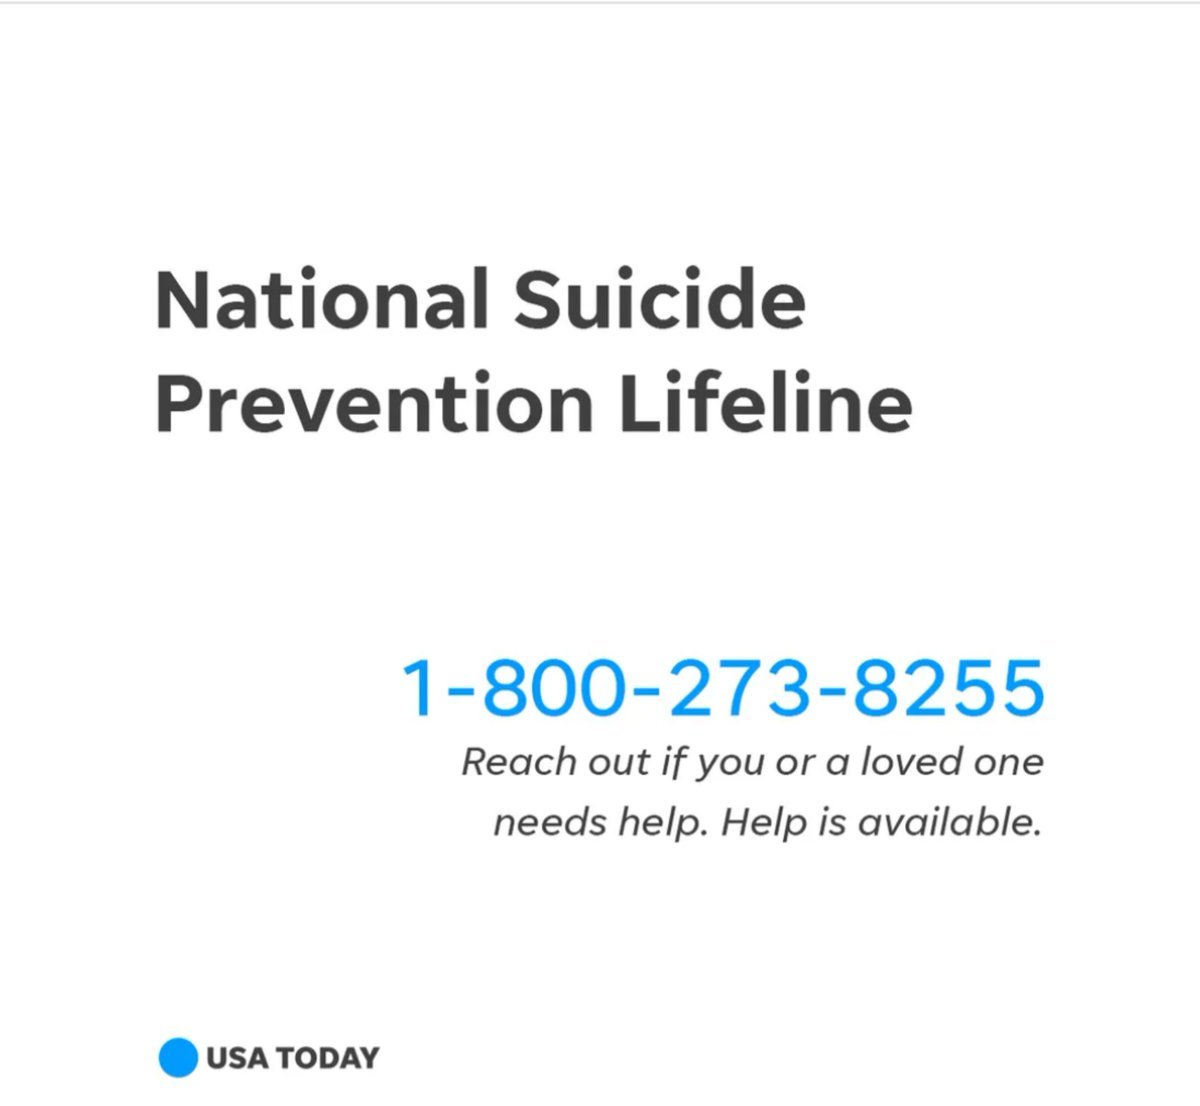 Wishing Ted Cruz's daughter a speedy recovery and the time and privacy for the family to heal. If you or someone you love is considering suicide, please call this number.